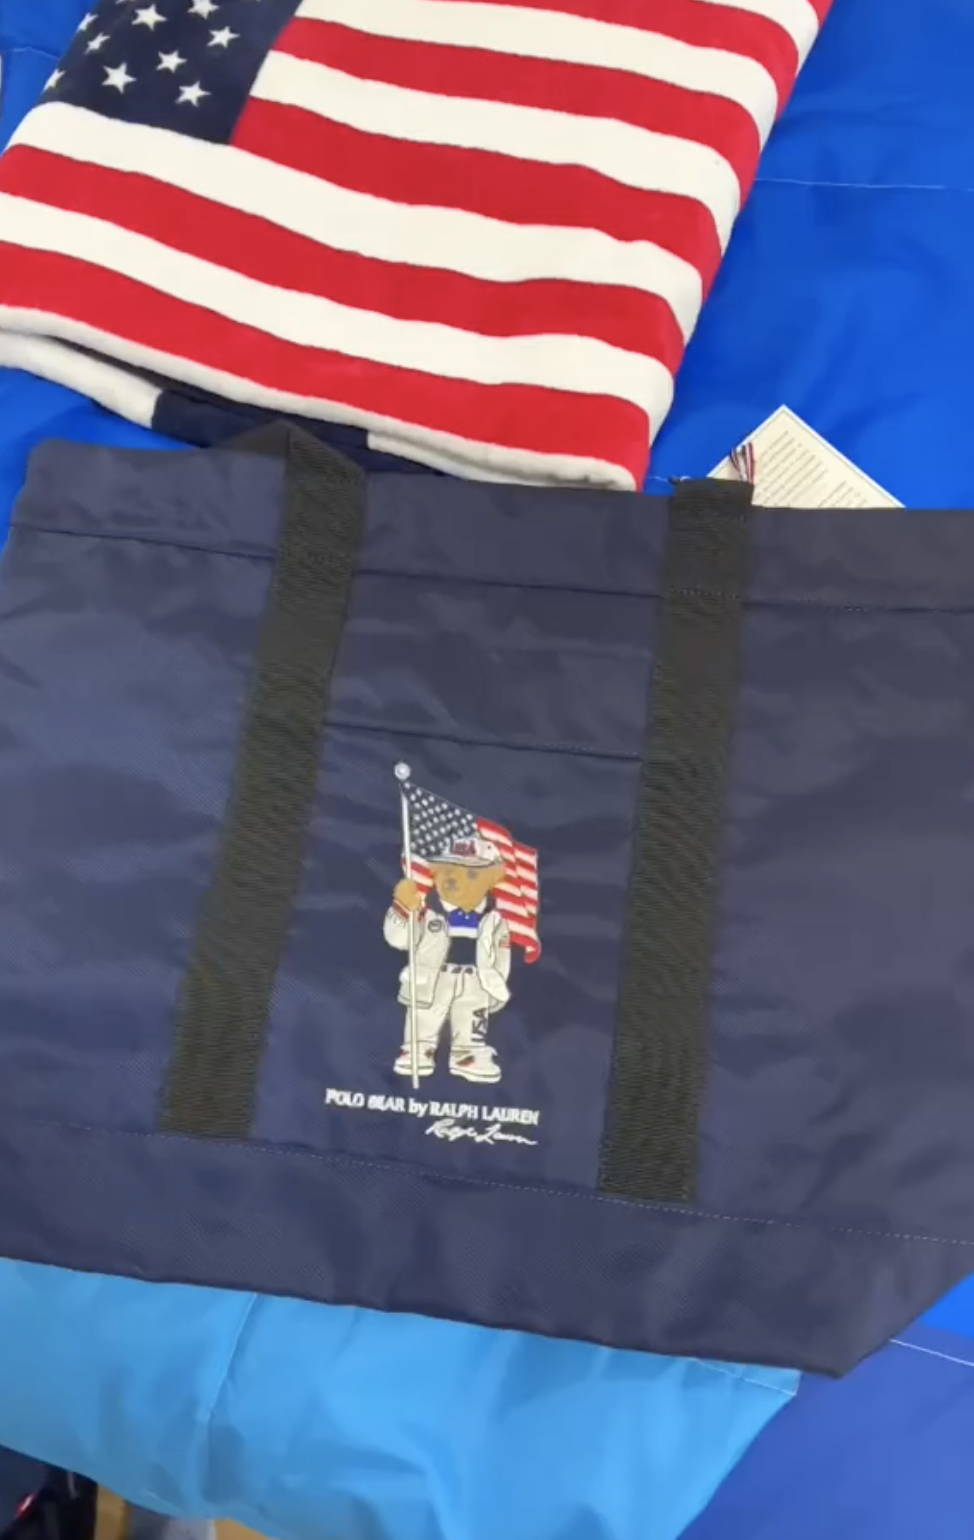 The tote has the Polo Bear by Ralph Lauren featuring an anthropomorphic bear wearing Ralph Lauren gear and holding a US flag